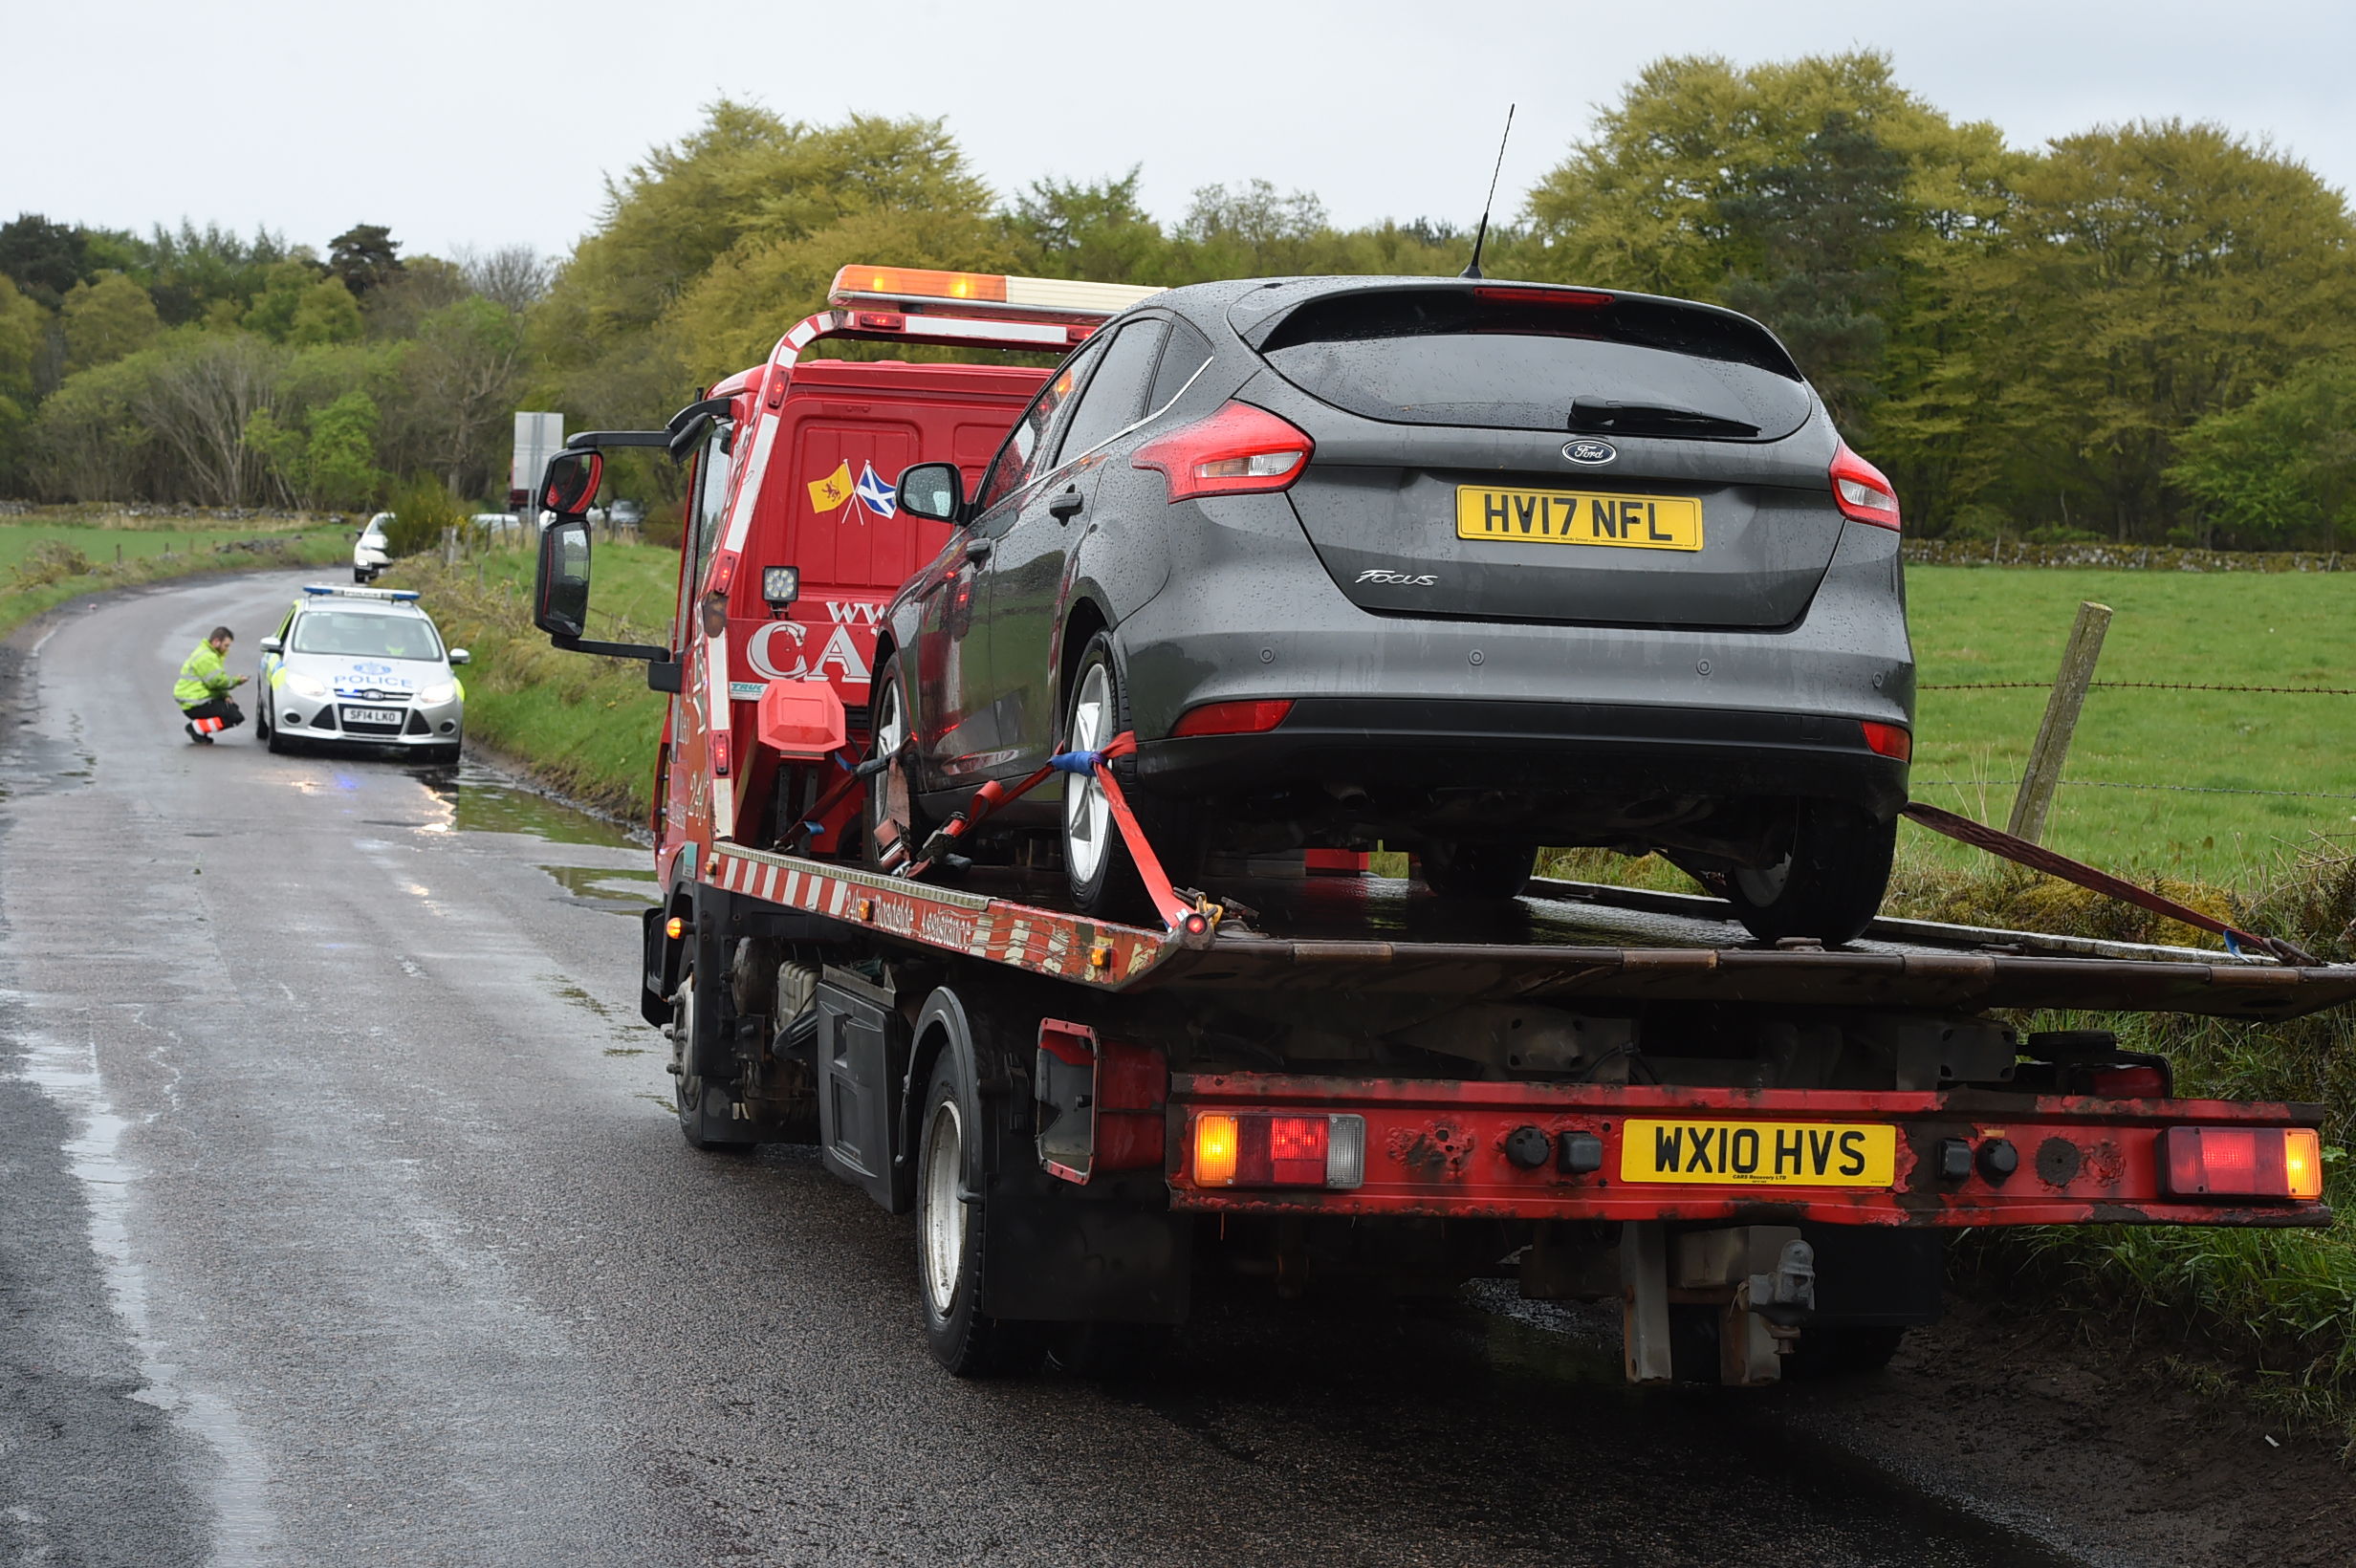 A recovery vehicle removed the car from the road.